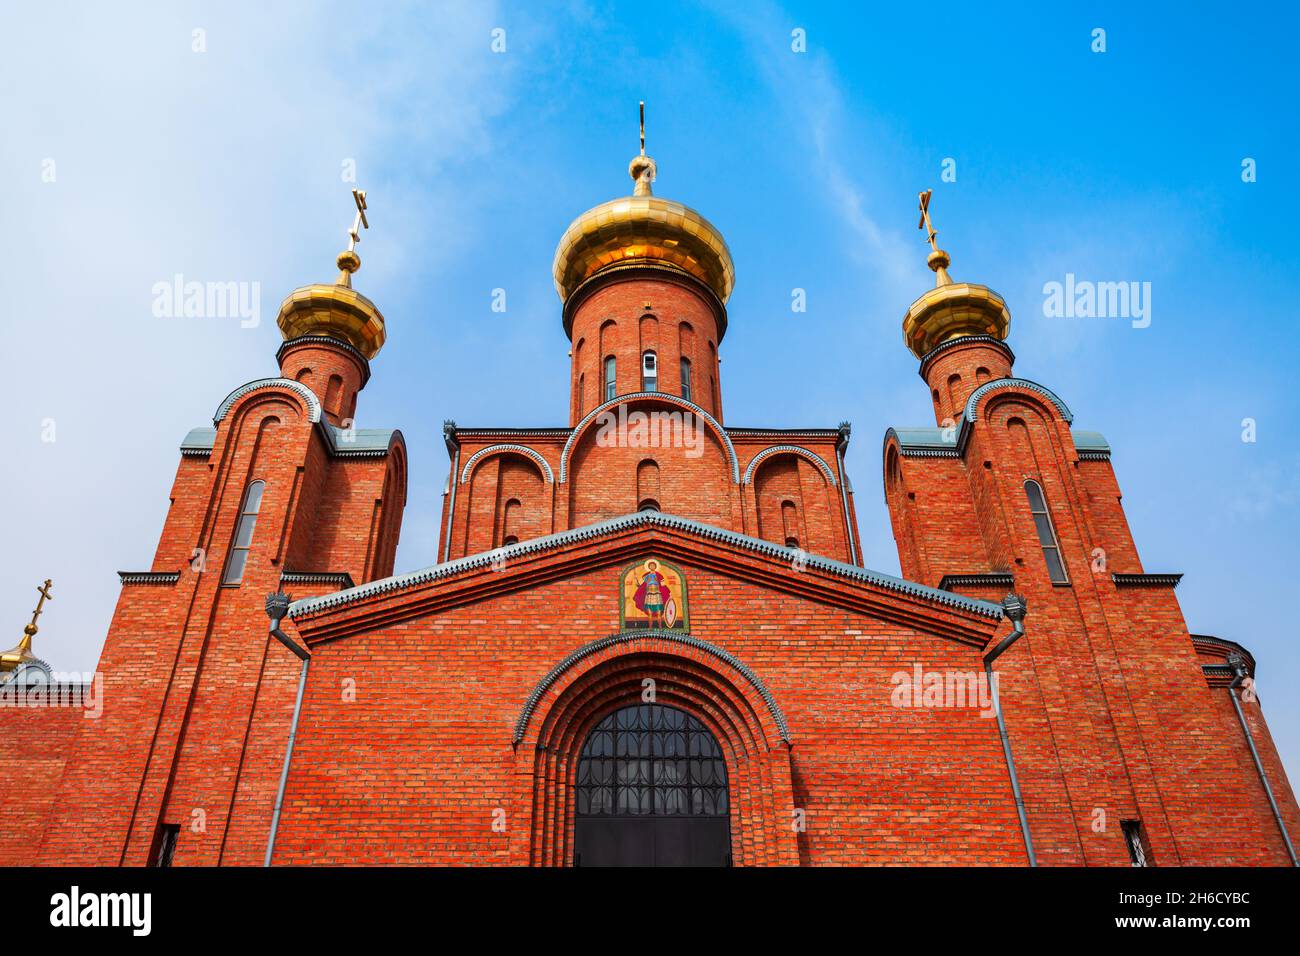 Pokrovsky Cathedral or Cathedral of the Intercession of Most Holy Theotokos in the centre of Mineralnye Vody city in Russia Stock Photo